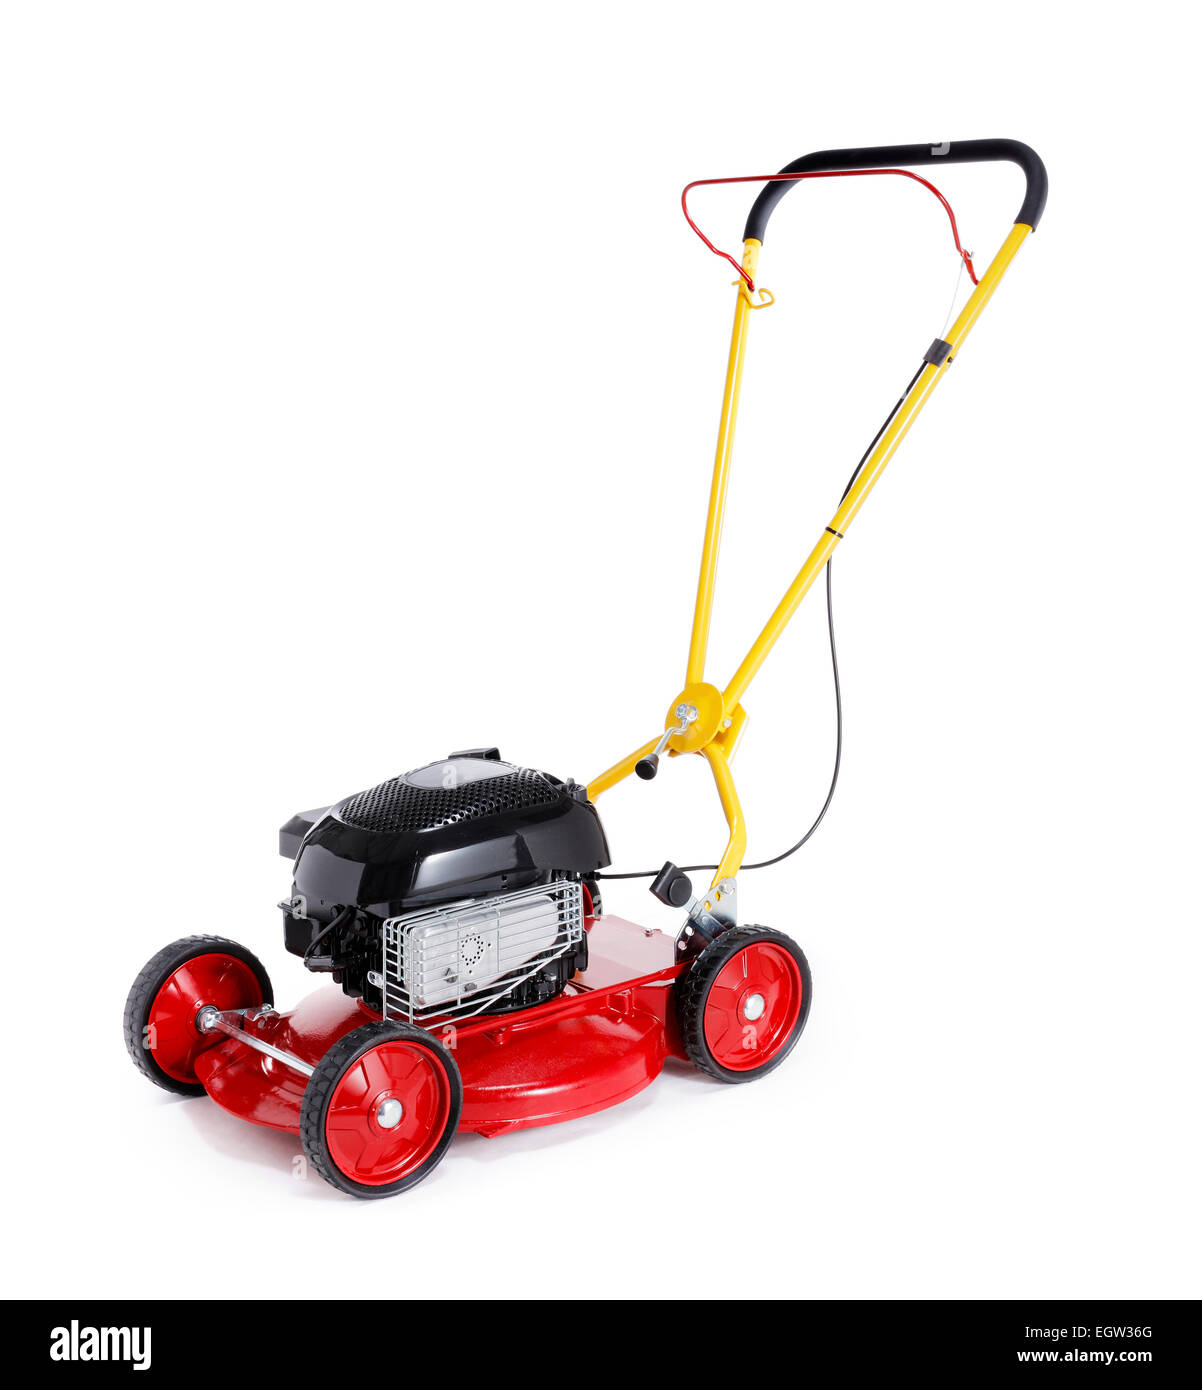 New red retro styled lawn mower isolated on white with natural shadows. Stock Photo